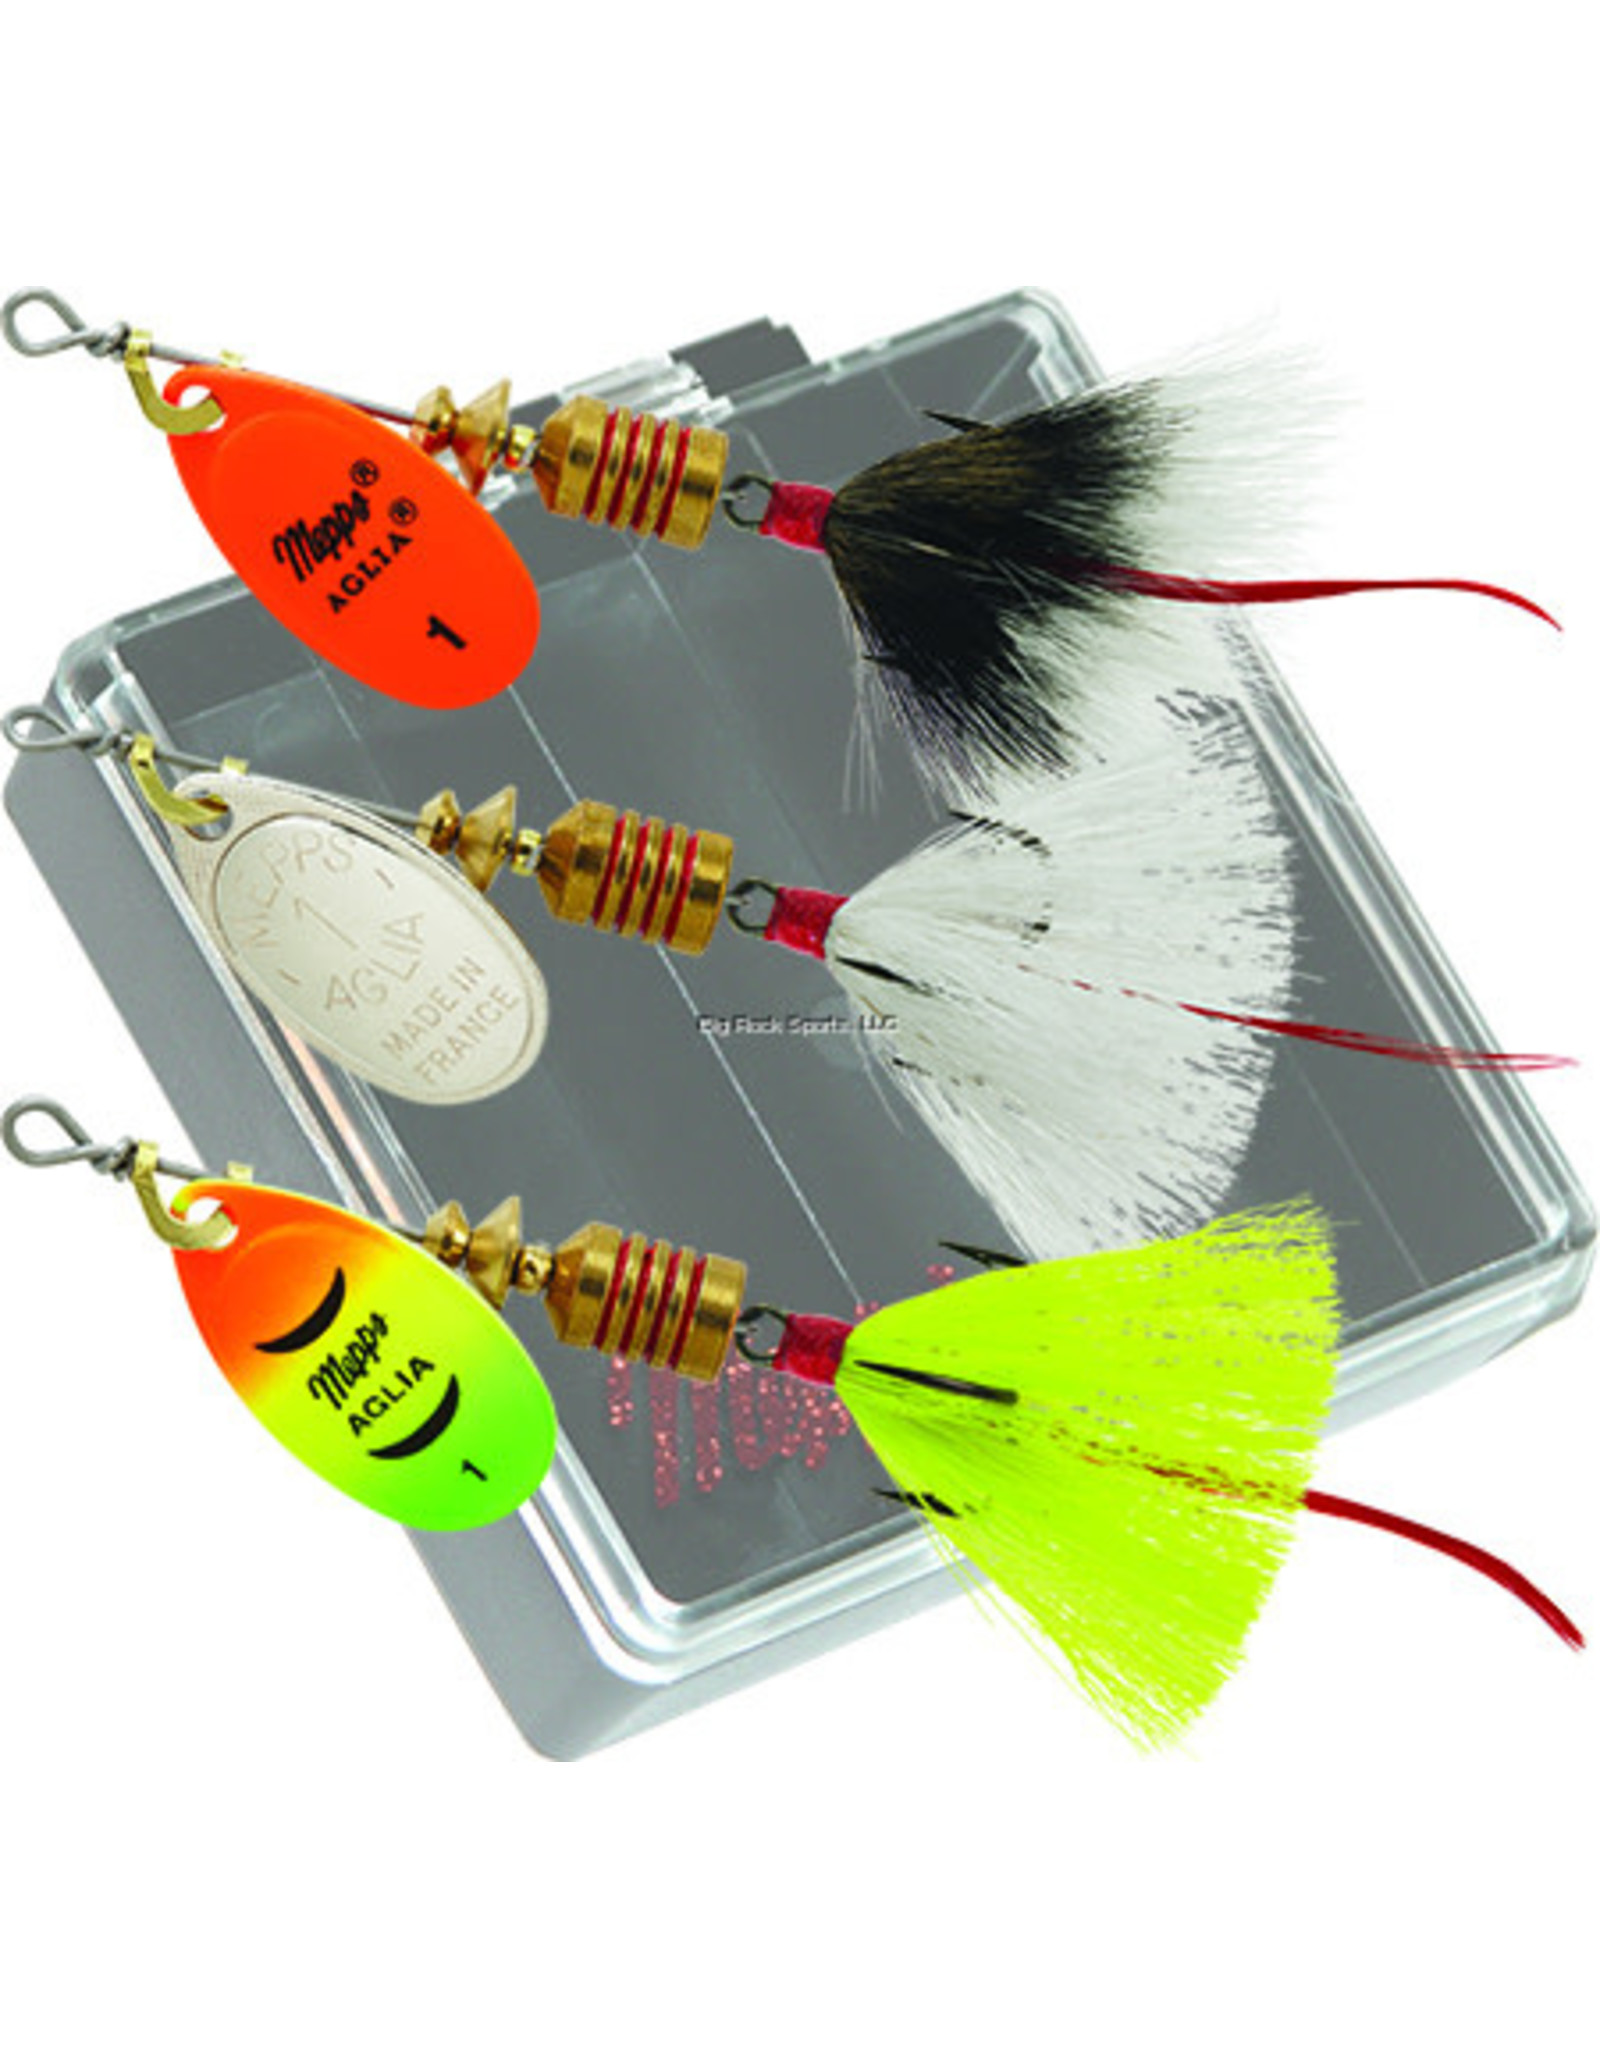 Mepps Mepps Pocket Pac Aglia Trout Kit, Assorted, Dressed Treble Hook, 3 per Pack, Size #1 Blade